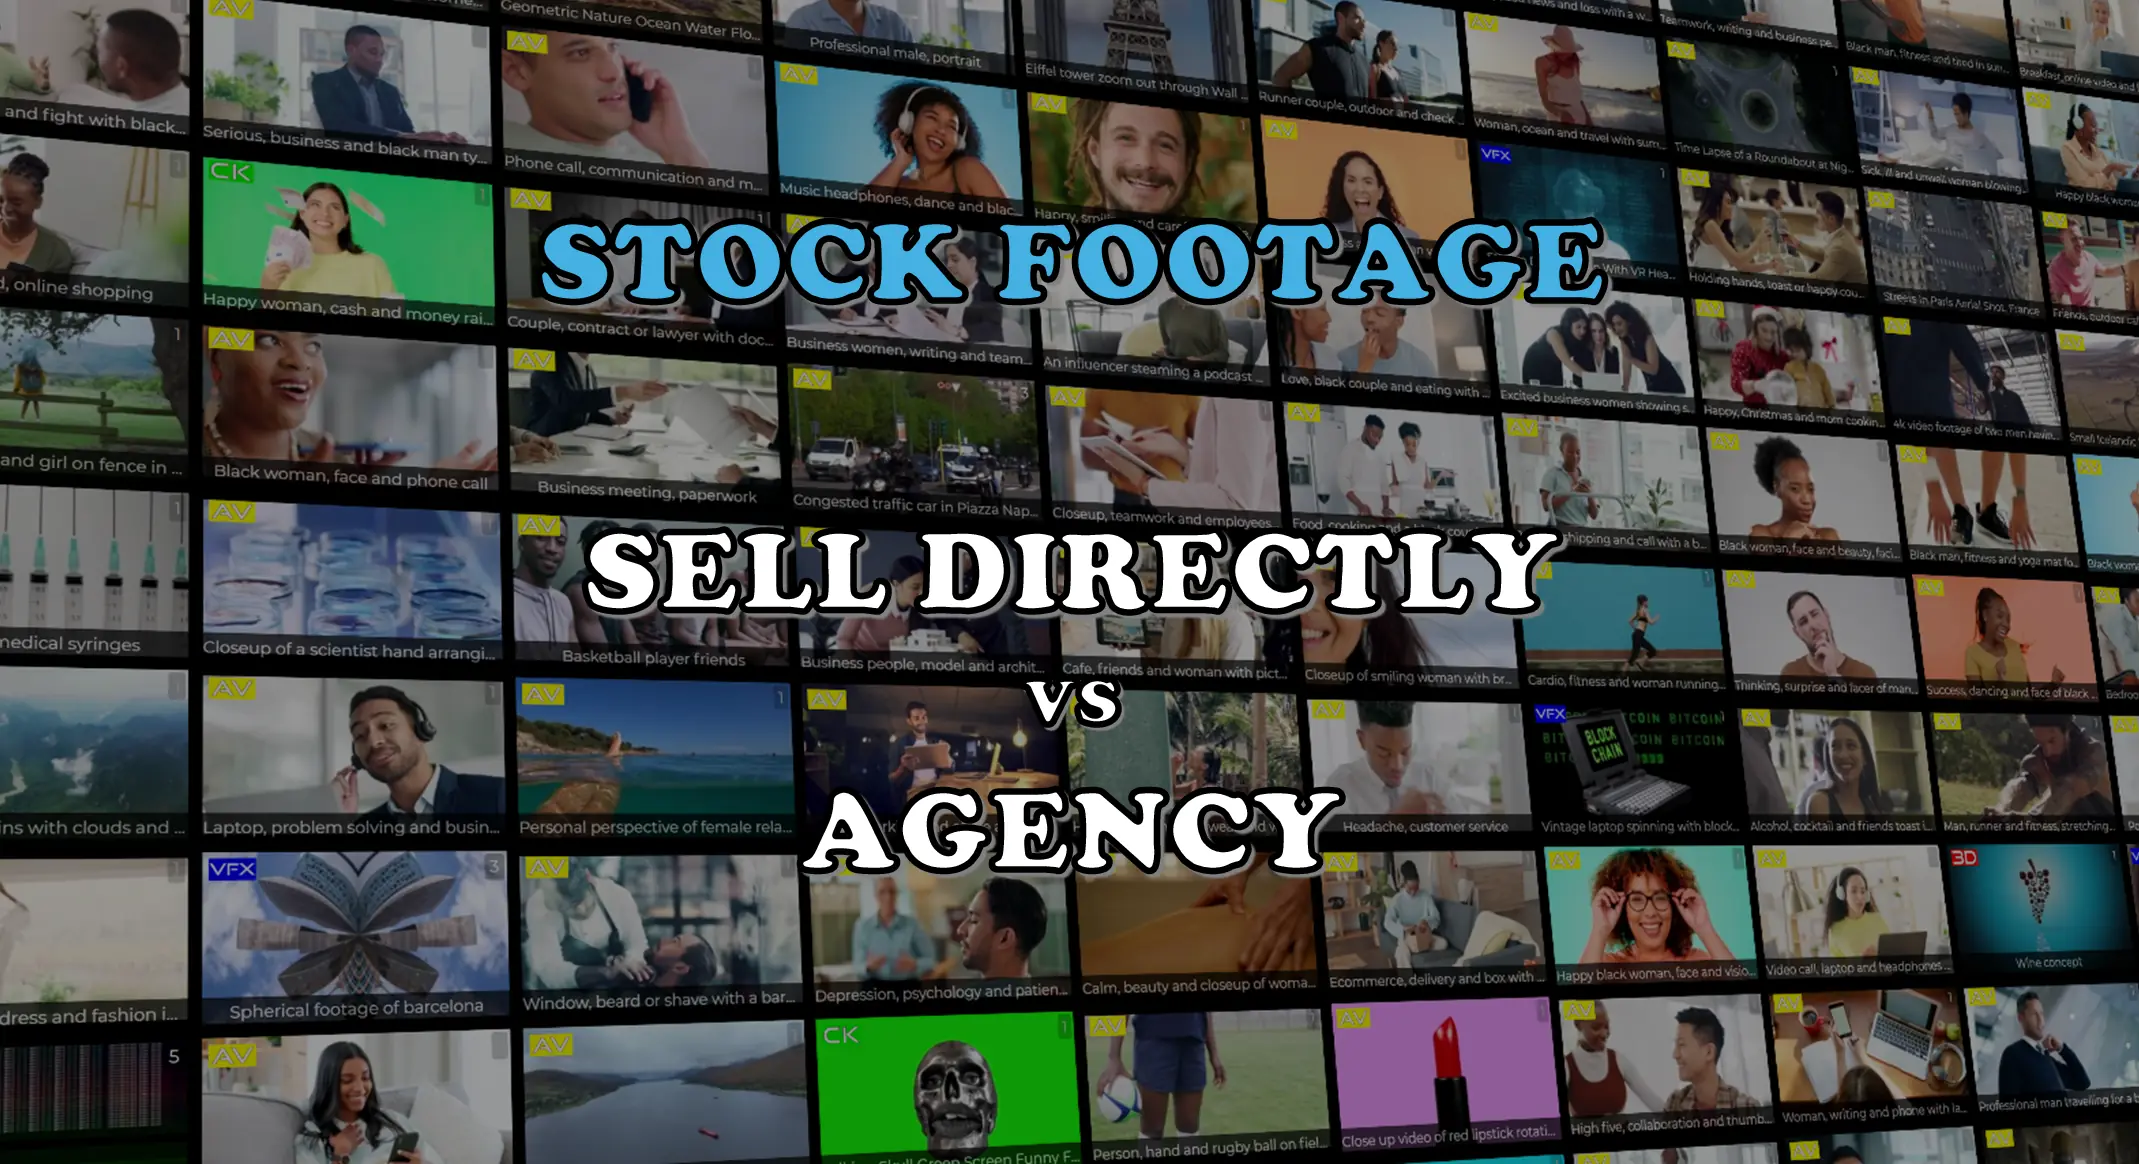 Stock footage: better to sell directly or use an agency?